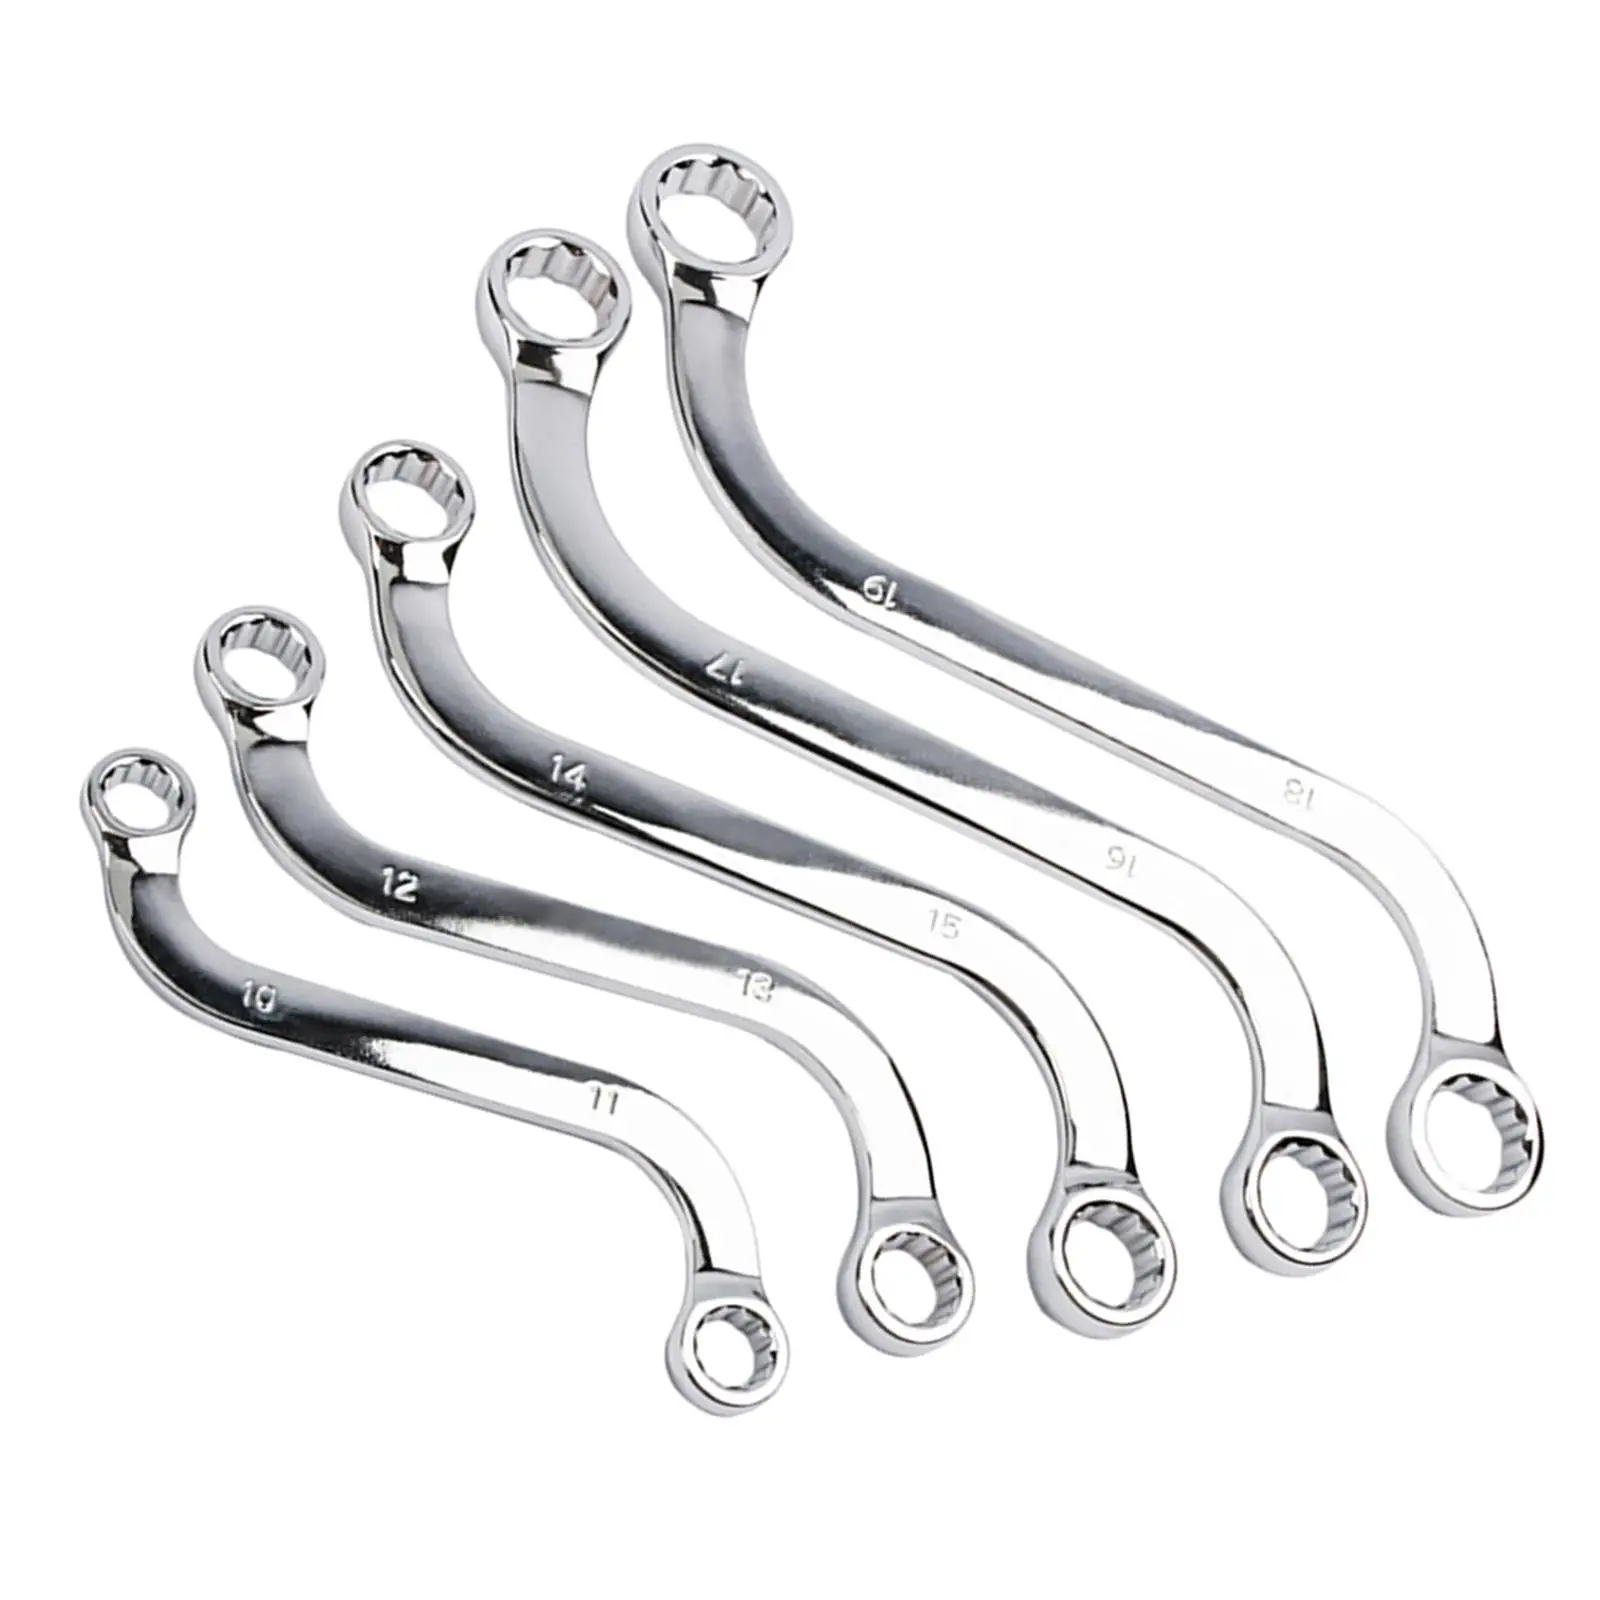 5x Multi Functional S Type Wrench Set Screw Nuts Wrench Double Sided Self Tightening for Car